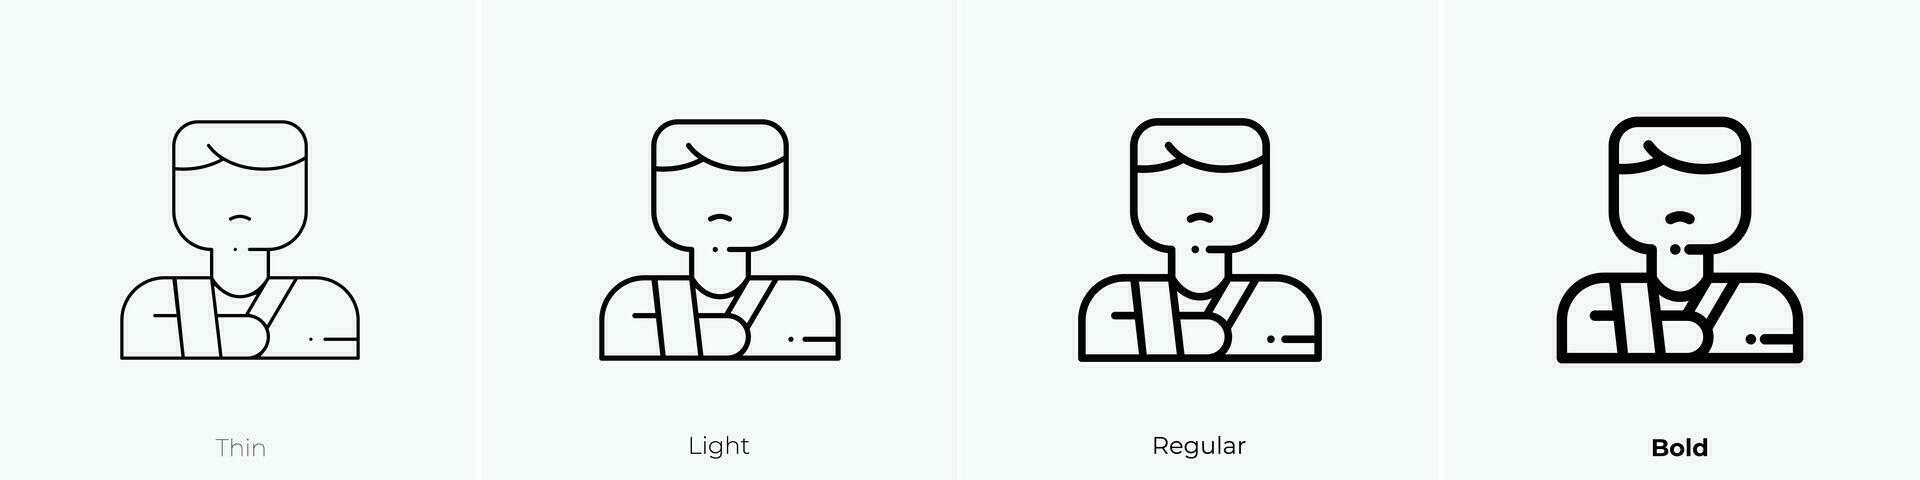 patient icon. Thin, Light, Regular And Bold style design isolated on white background vector